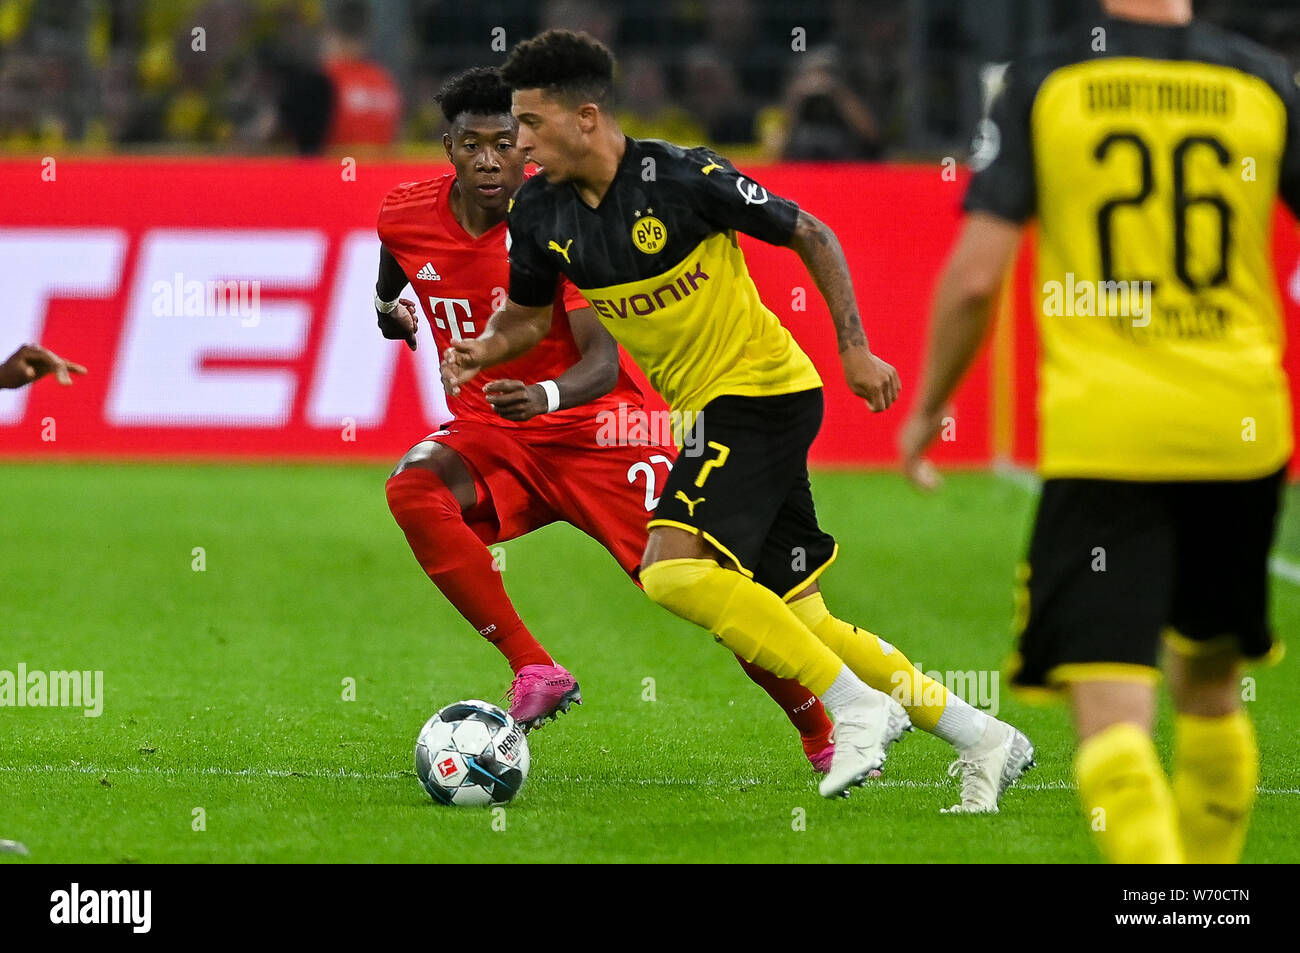 David Alaba from Bayern Munich (L) and Jadon Sancho from Borussia Dortmund (R) seen in action during the Germany Supercup Final 2019 match between Borussia Dortmund and Bayern Munich.(Final score: Borussia Dortmund 2:0 Bayern Munich) Stock Photo